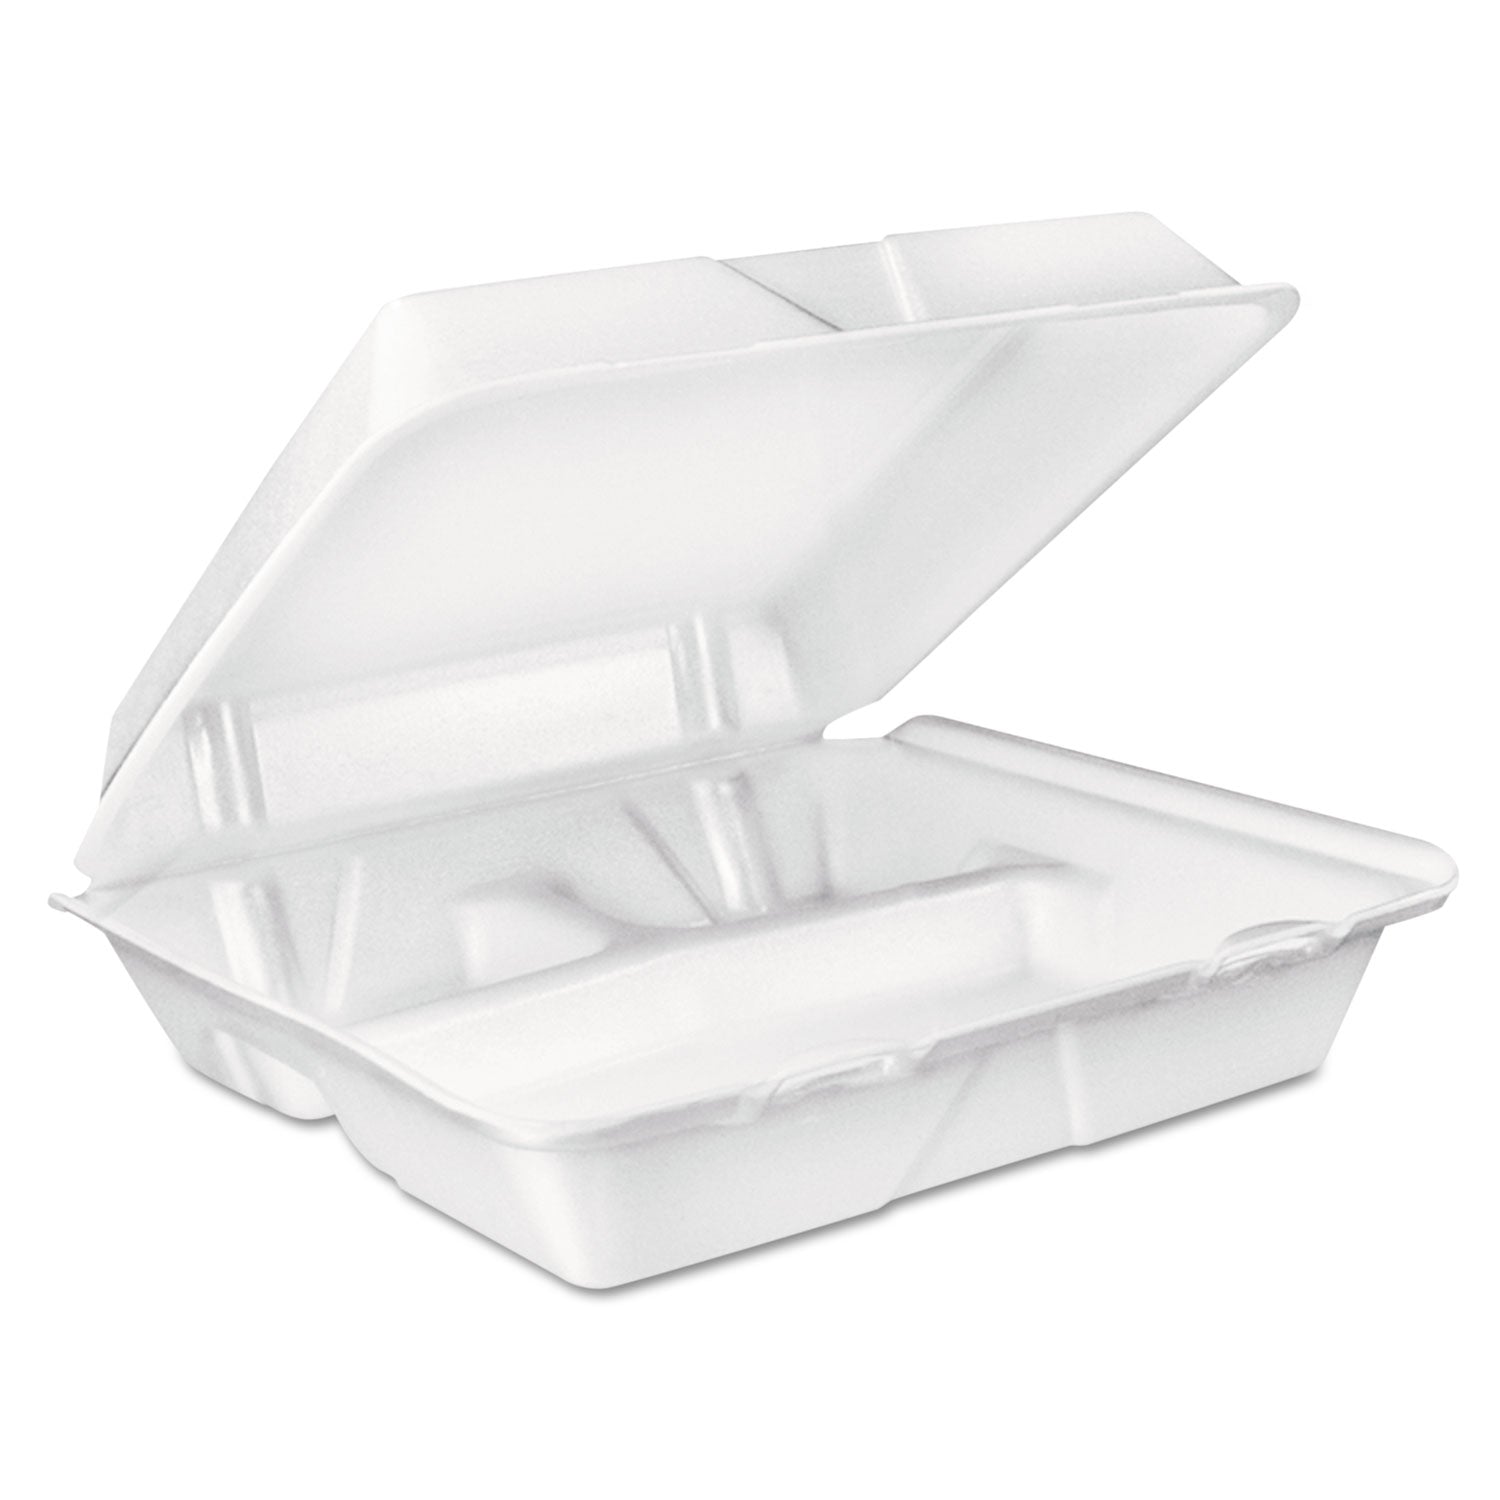 Foam Hinged Lid Container, 3-Compartment, 8 oz, 9 x 9.4 x 3, White, 200/Carton - 